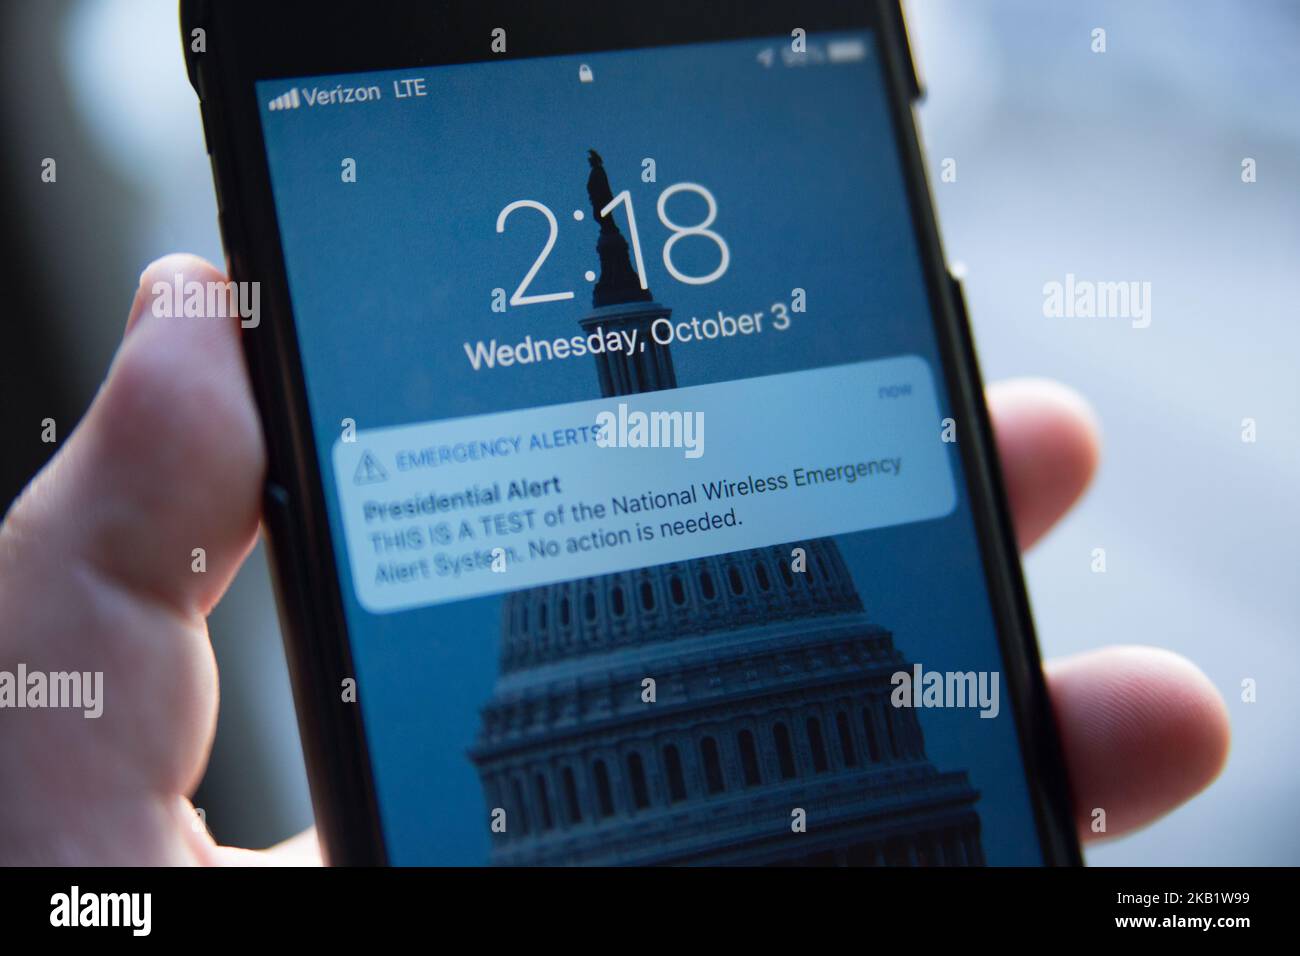 A notification is seen on a smartphone as FEMA tests the new 'Presidential Alert' functionality of the Wireless Emergency Alerts system, October 3, 2018 in Philadelphia. The new alert, which is accompanied by a loud sound and from which cellular subscribers cannot opt-out, is designed to be used by the President to communicate to the public during a national emergency. (Photo by Michael Candelori/NurPhoto) Stock Photo